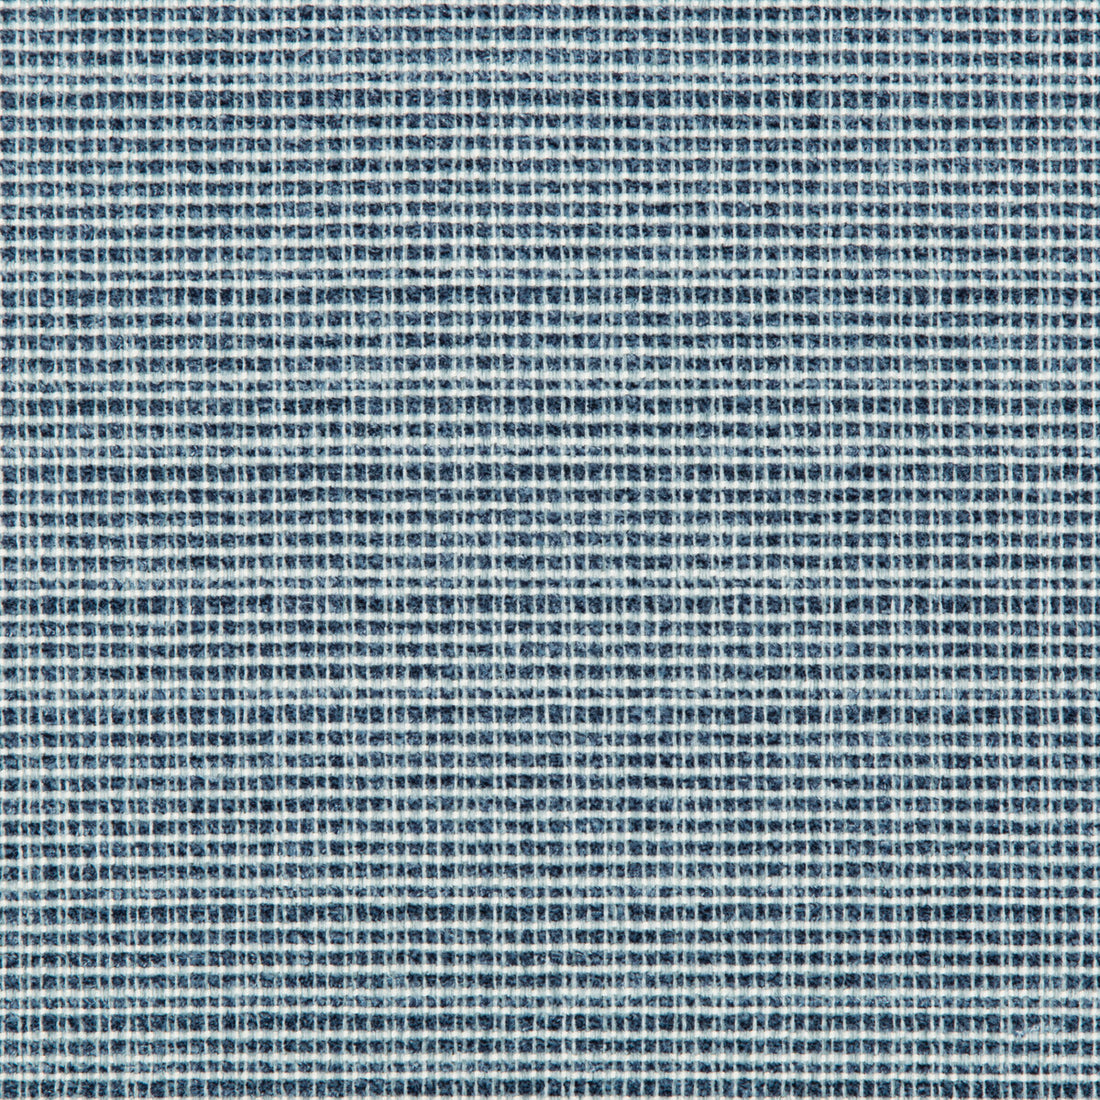 Saddlebrook fabric in indigo color - pattern 35345.5.0 - by Kravet Basics in the Greenwich collection